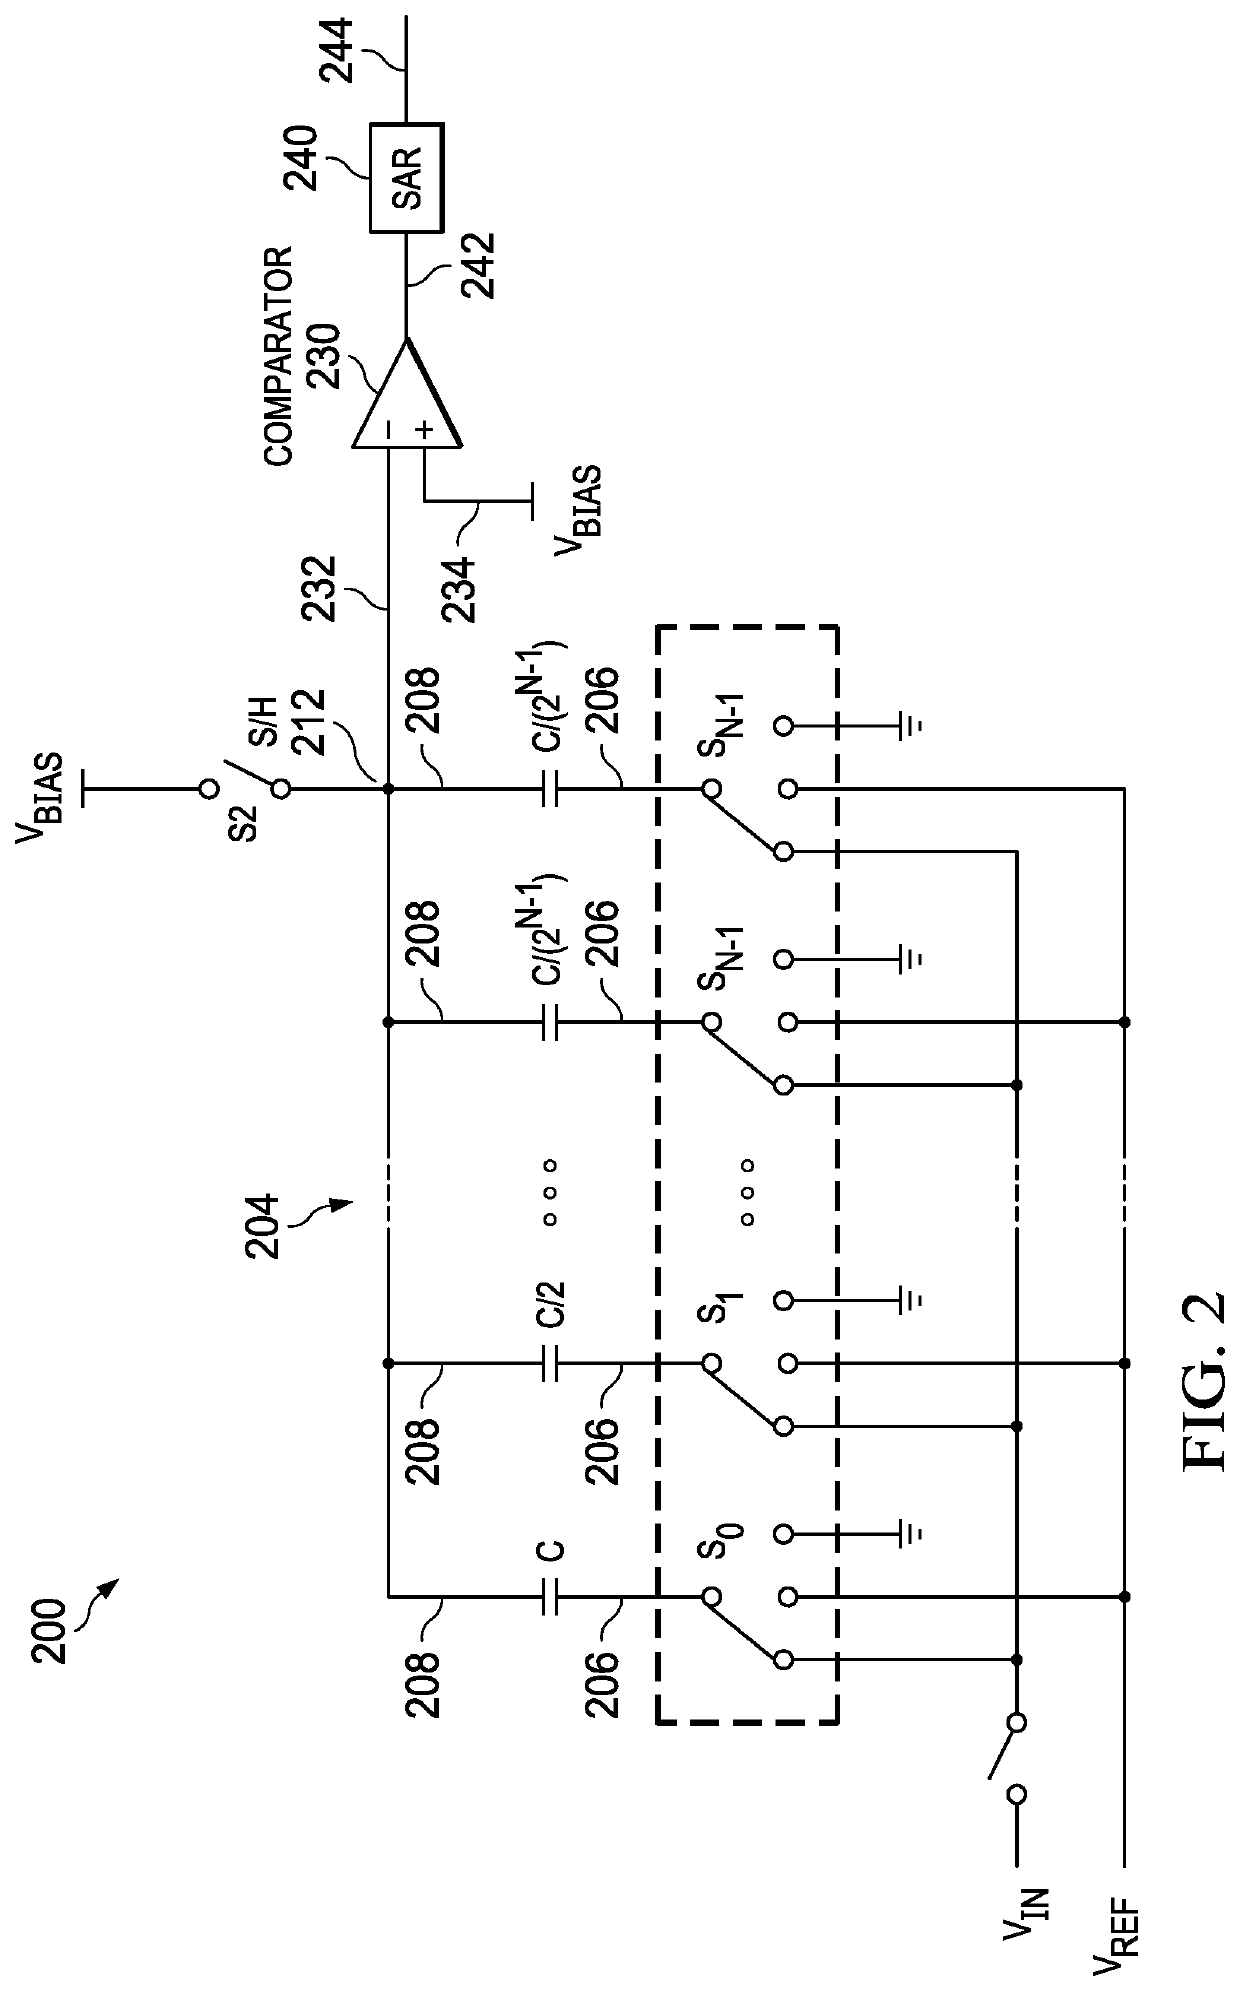 Analog to digital (A/D) converter with internal diagnostic circuit